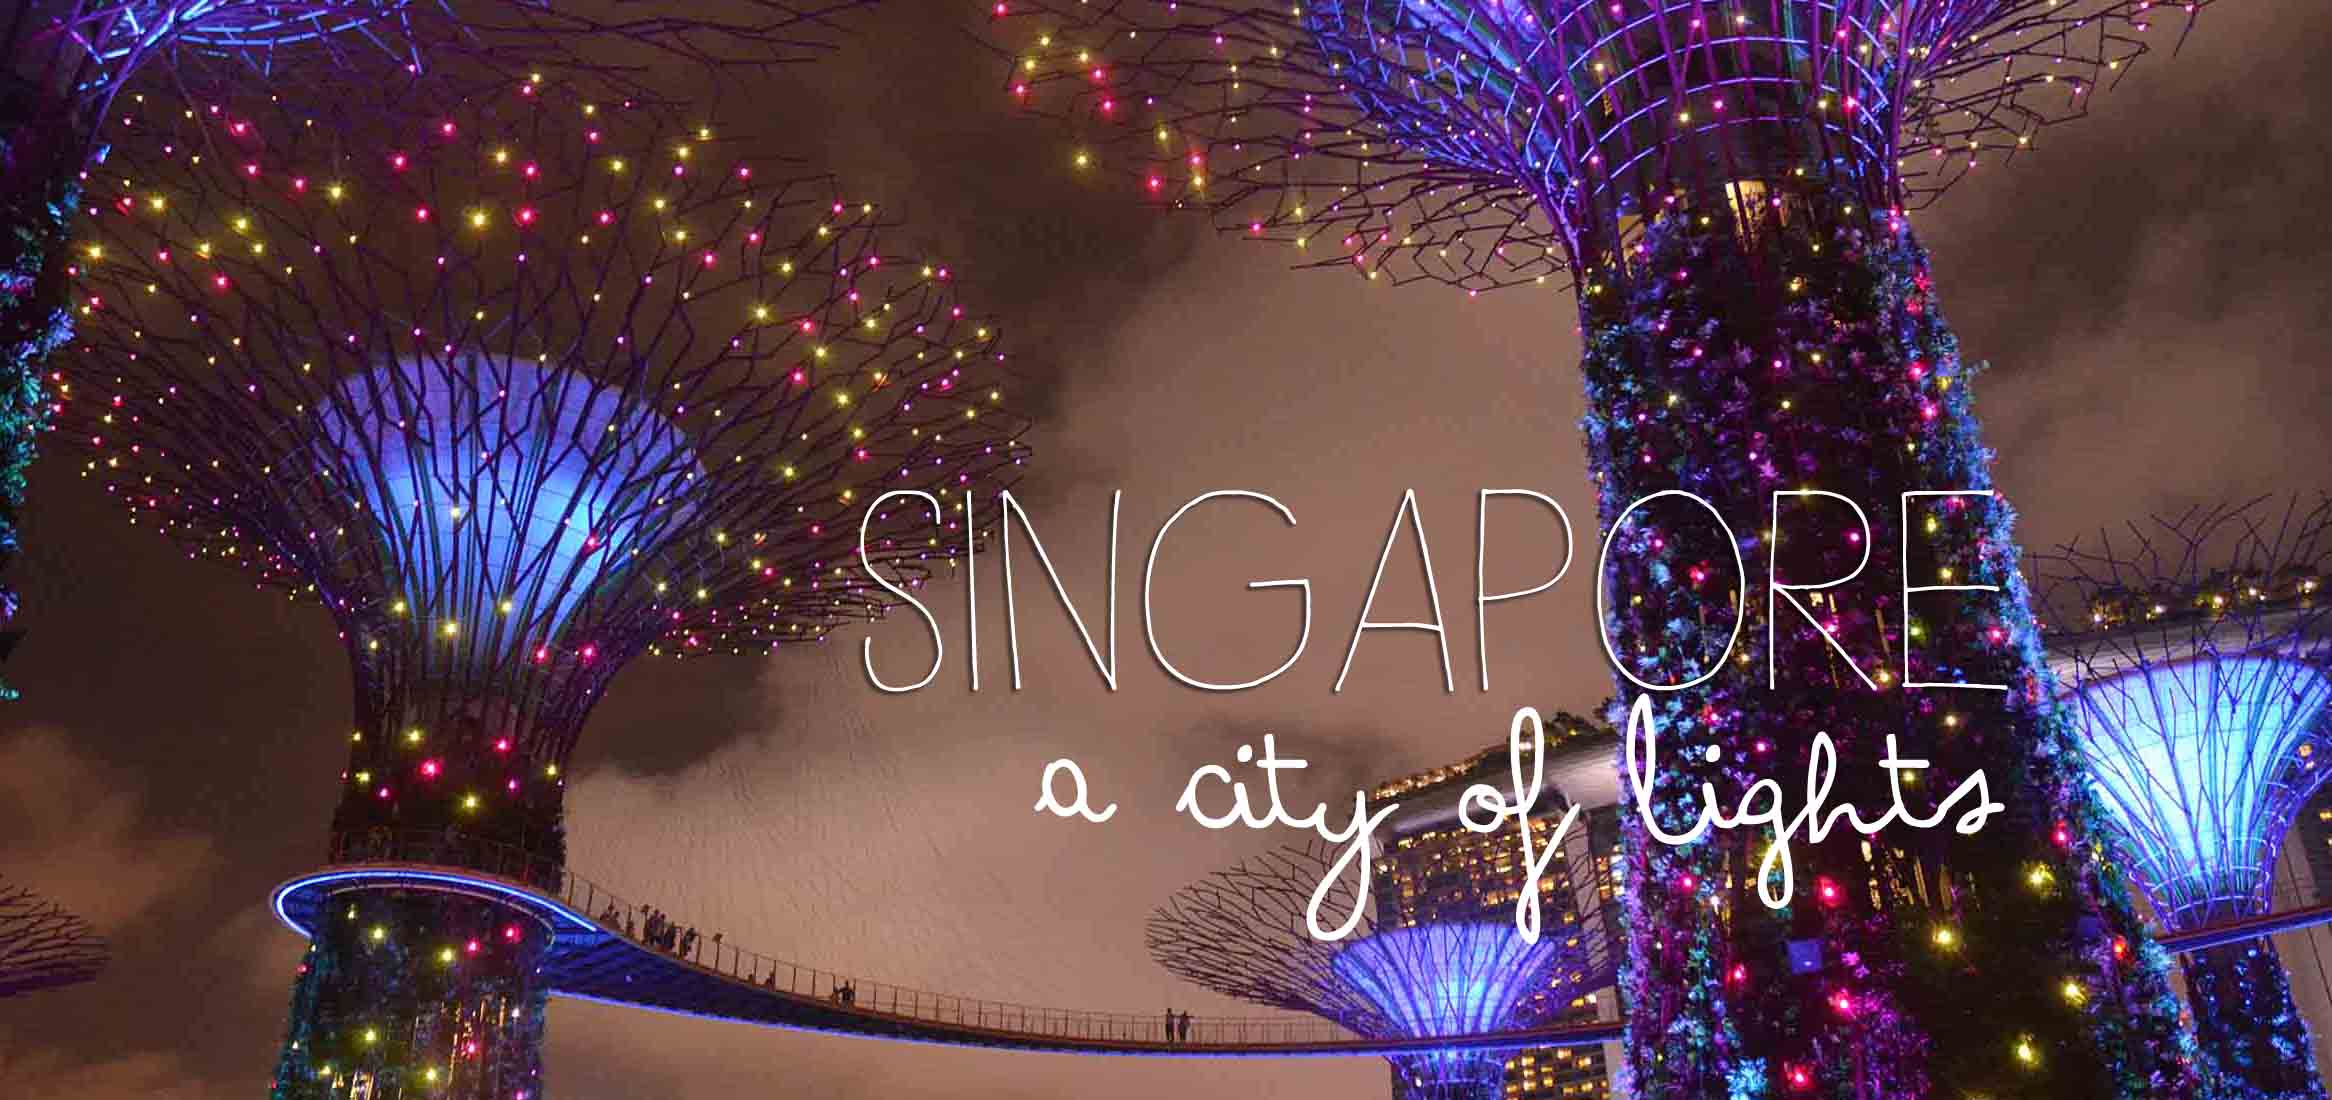 Singpore - A City of Lights | small and tall travel